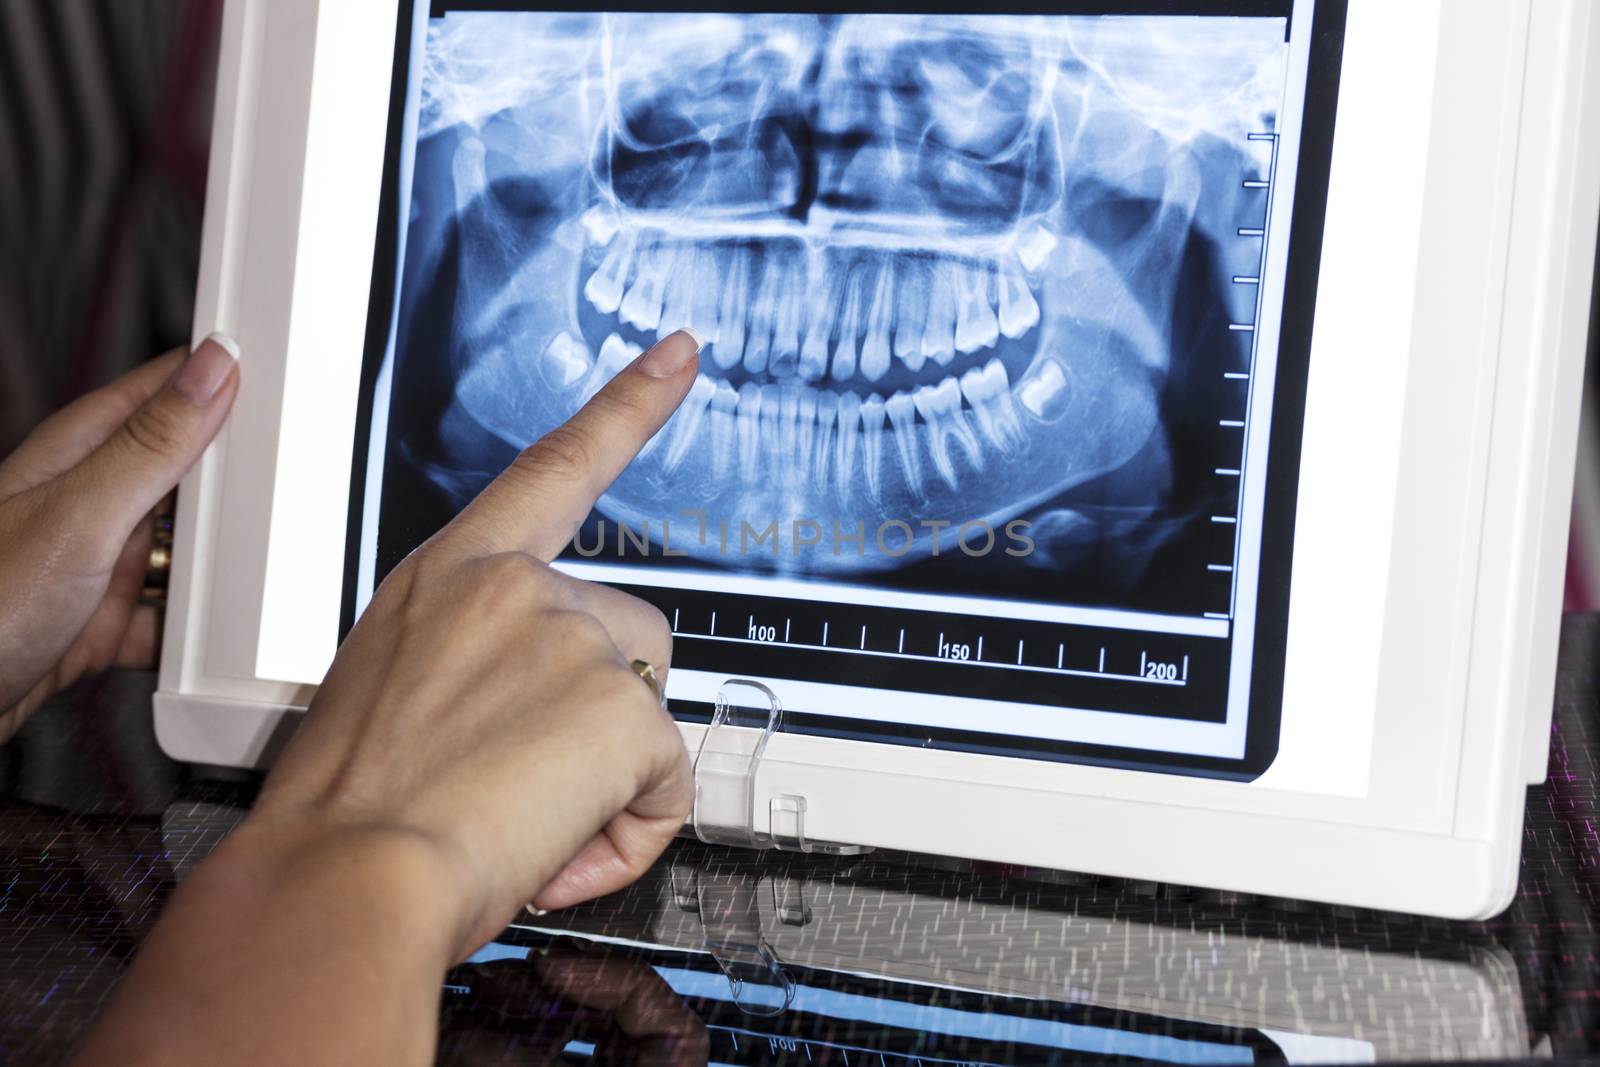 DEntal panoramic x-ray in wiever  with finger pointing